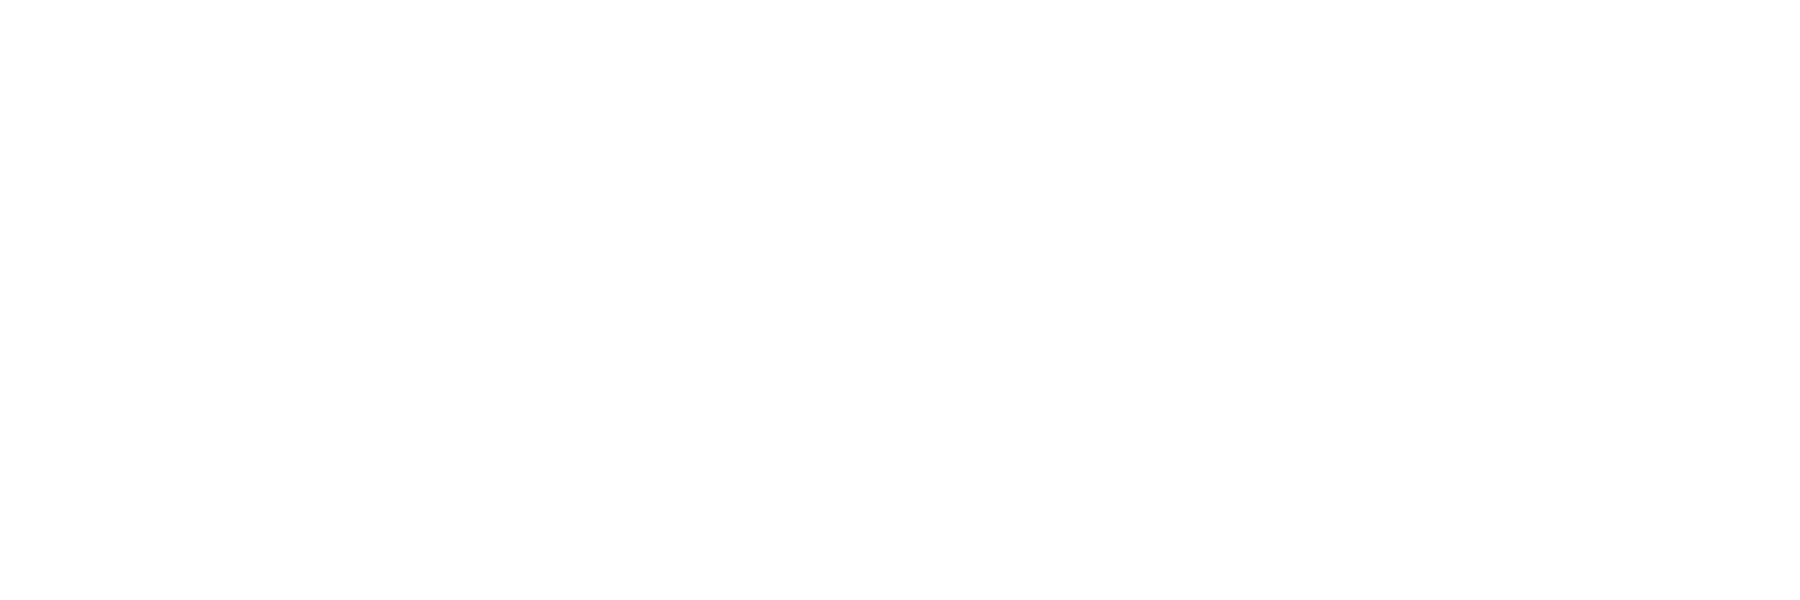 NWCCD Student self Service